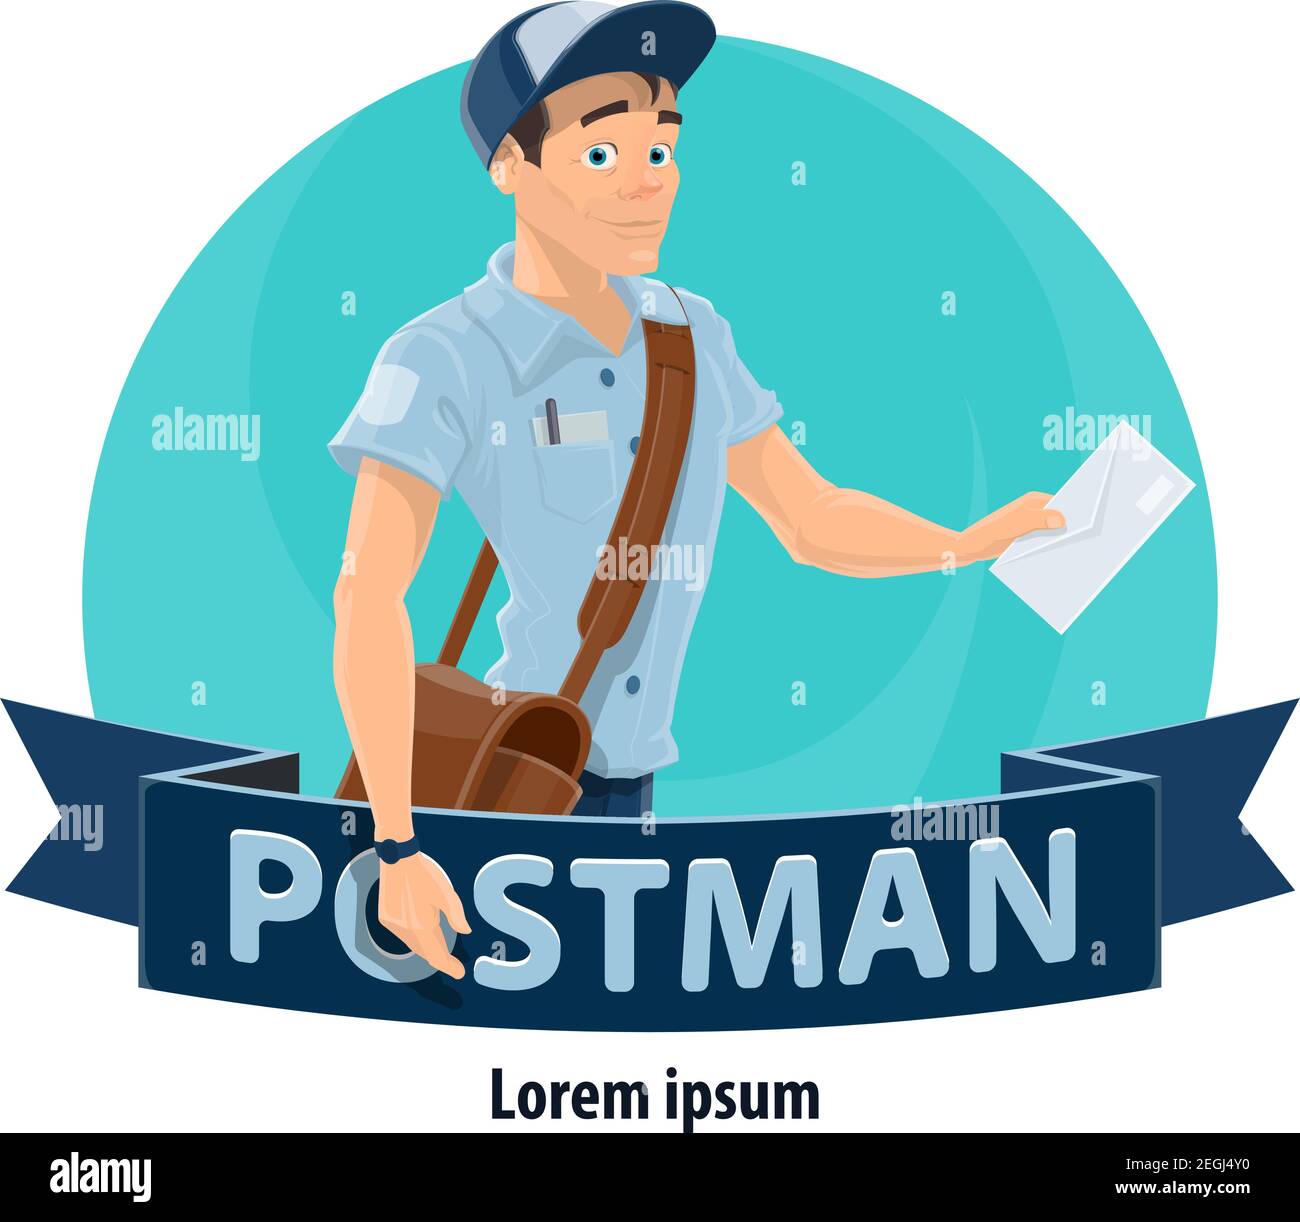 Postman with mailbag and letter cartoon icon. Mailman in blue uniform and hat delivering letter envelope symbol with ribbon banner for postal office w Stock Vector